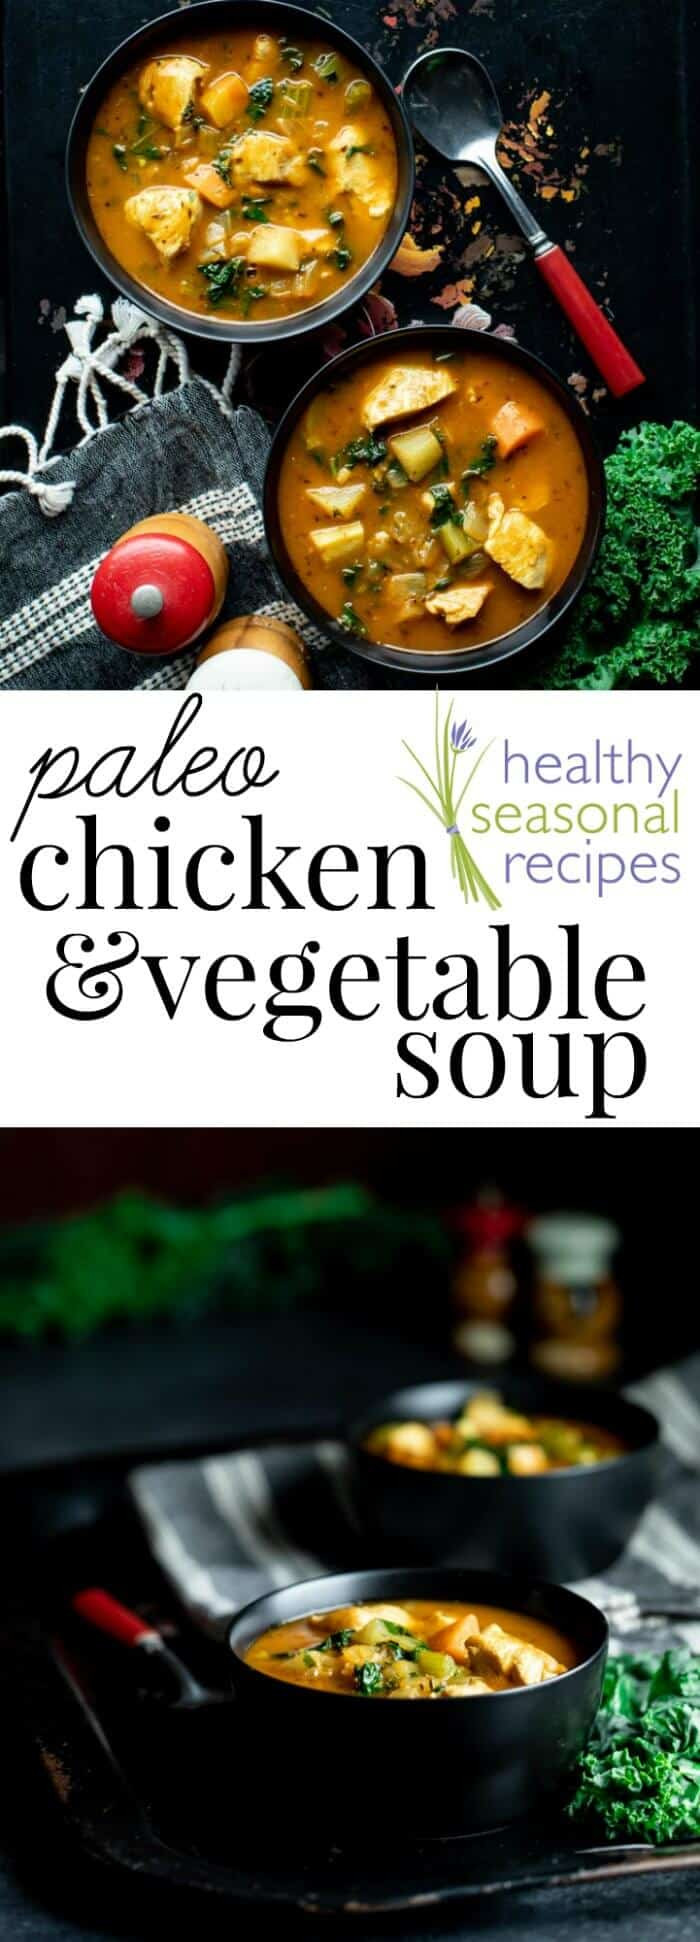 Paleo Chicken Vegetable Soup
 chicken ve able soup paleo Healthy Seasonal Recipes